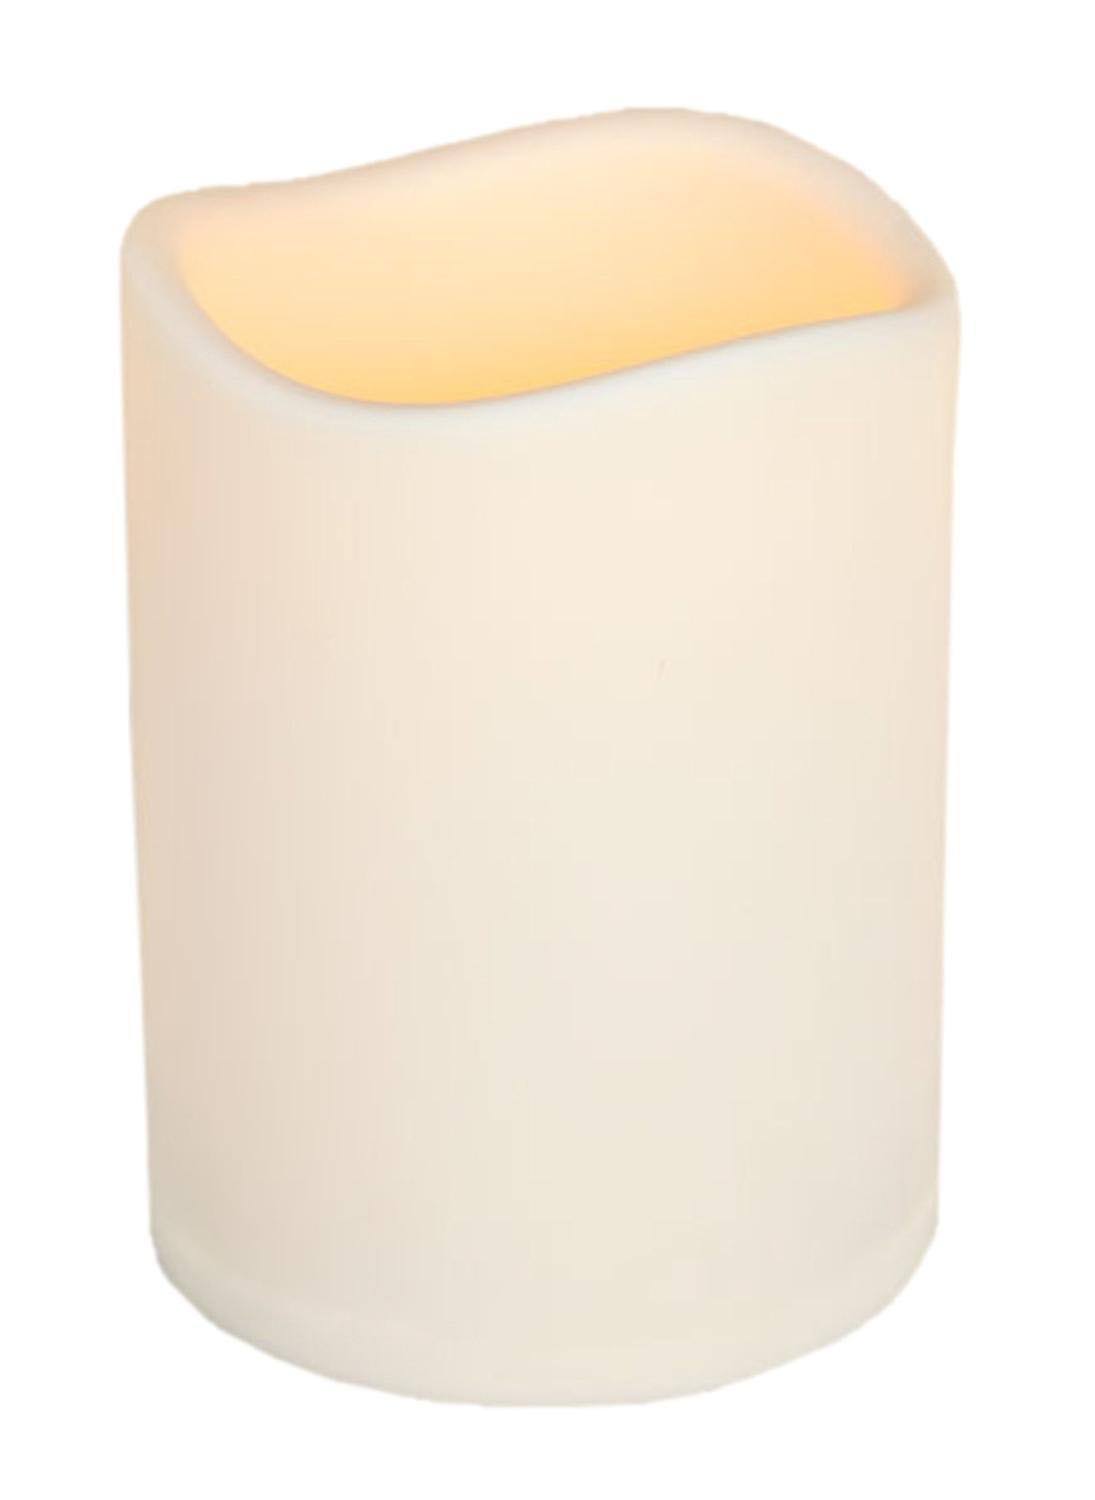 Everlasting Glow Led Indoor & Outdoor Candle - Timer, Bisque, 4.625"x6"